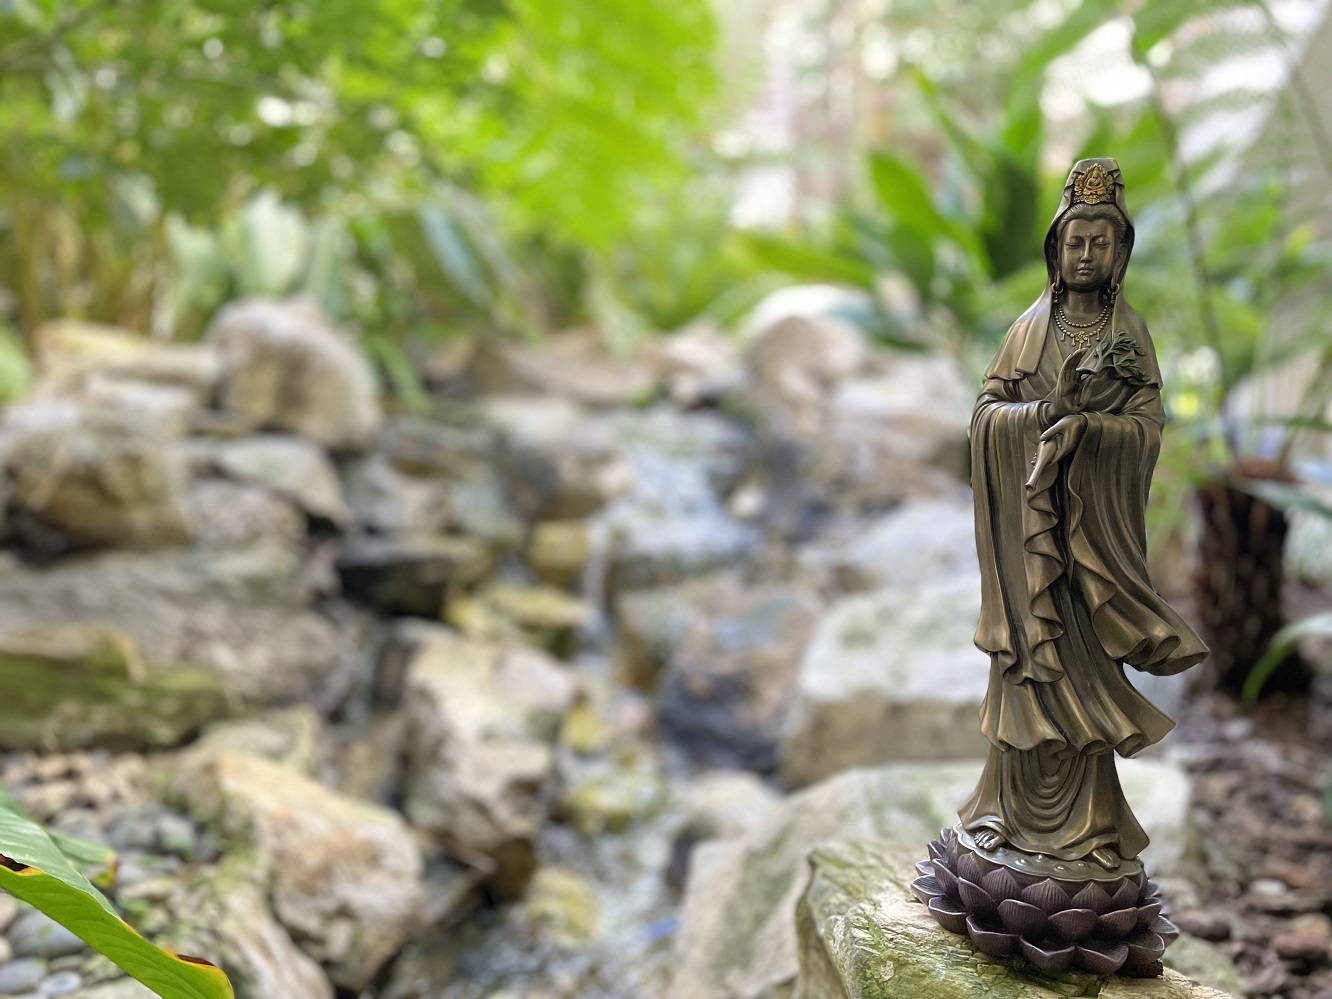 Small statue of the Asian goddess of healing, Kwan Yin, presented outdoors with green leaves and a rocks with running water flowing in the background